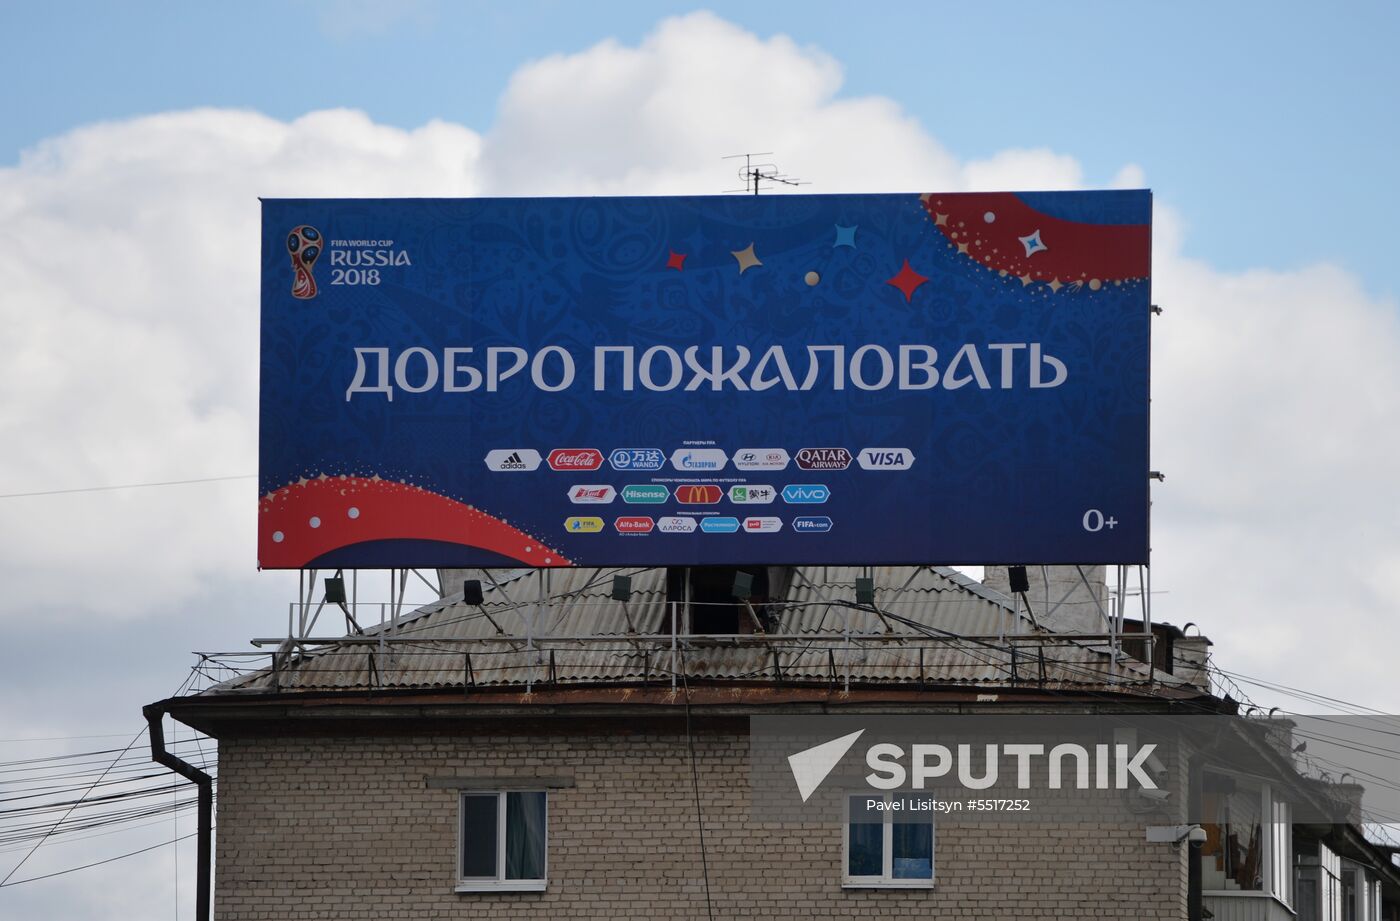 Russia World Cup Preparations Yekaterinburg